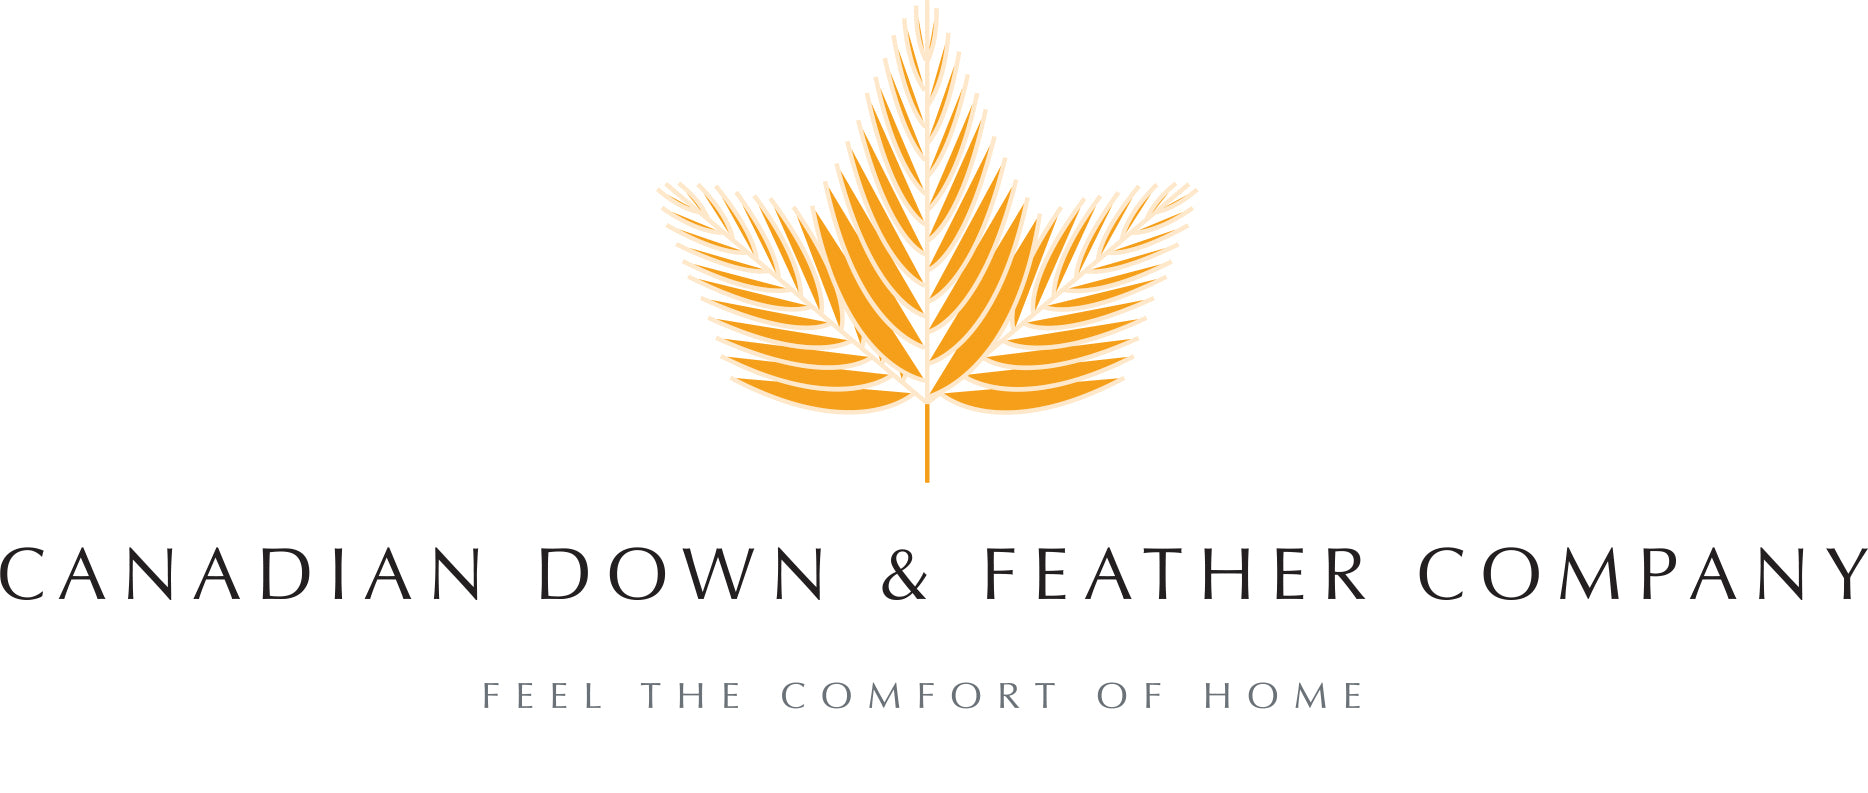 canadian down & feather company